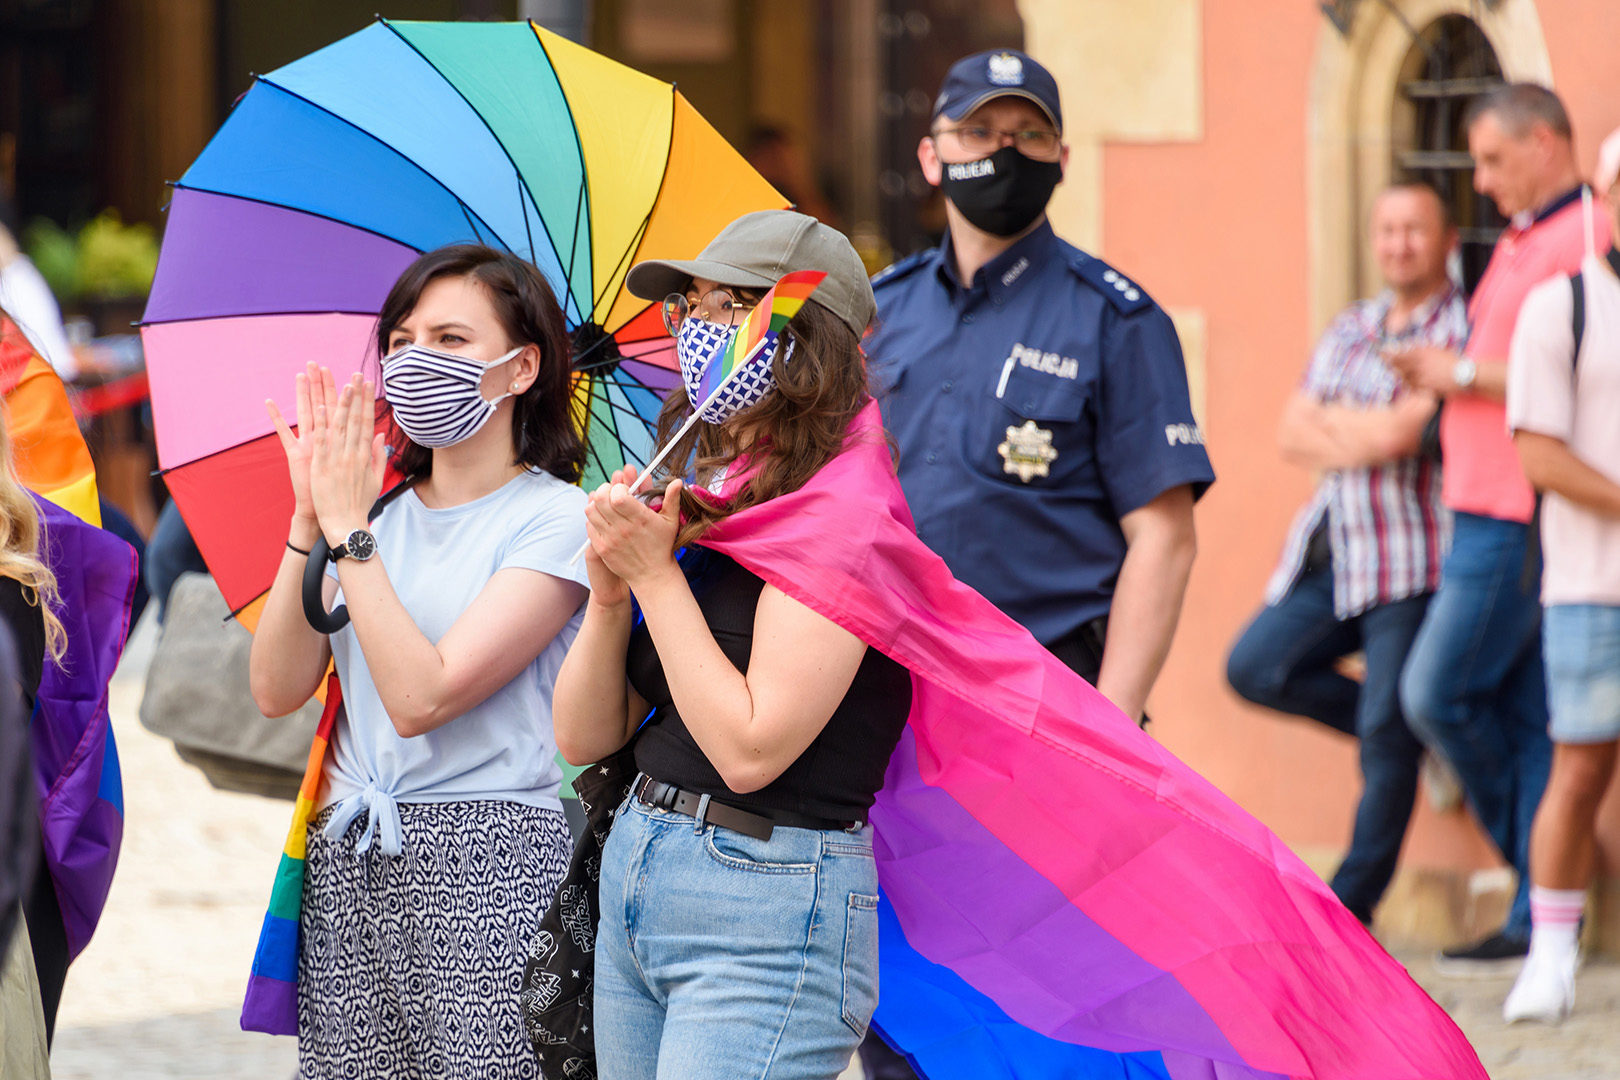 Women and LGBT's rights in Poland